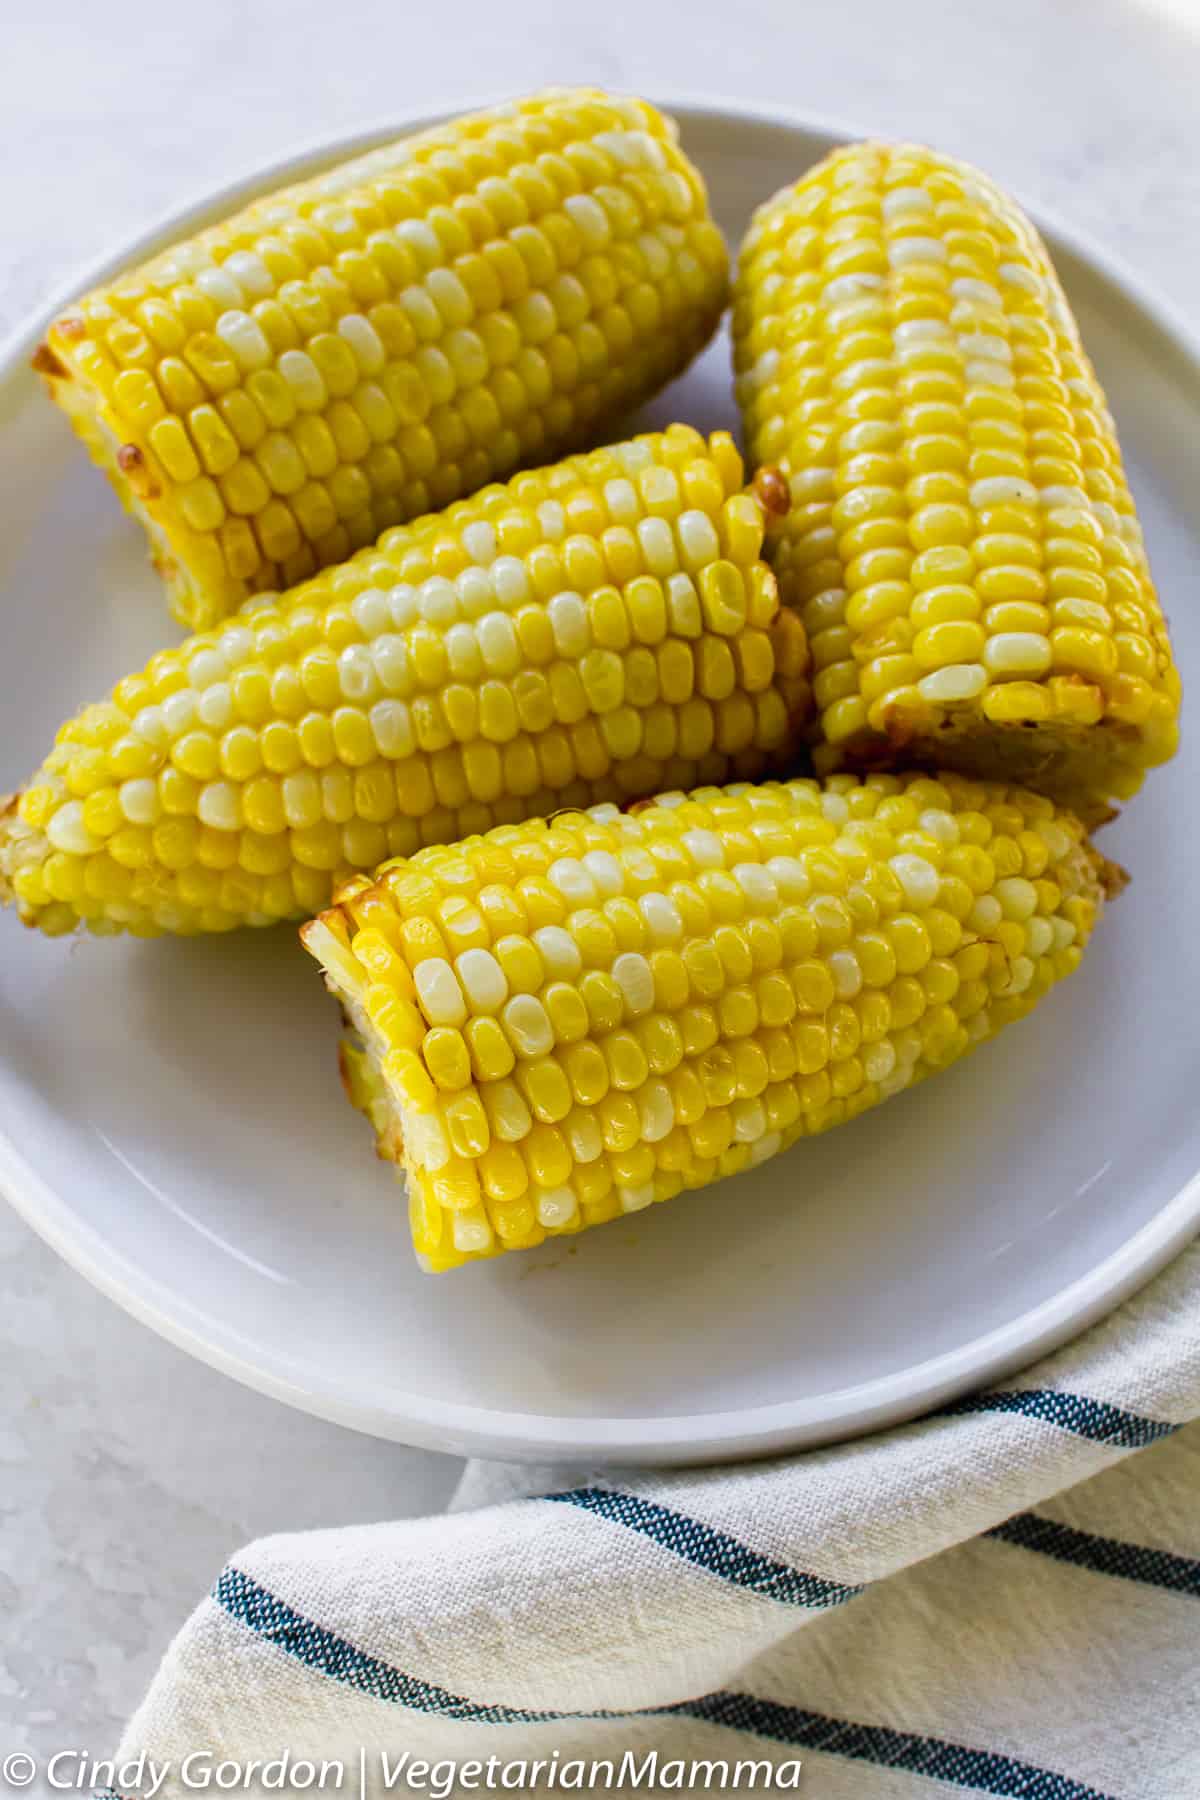 You are going to love this quick and easy air fryer corn on the cob.